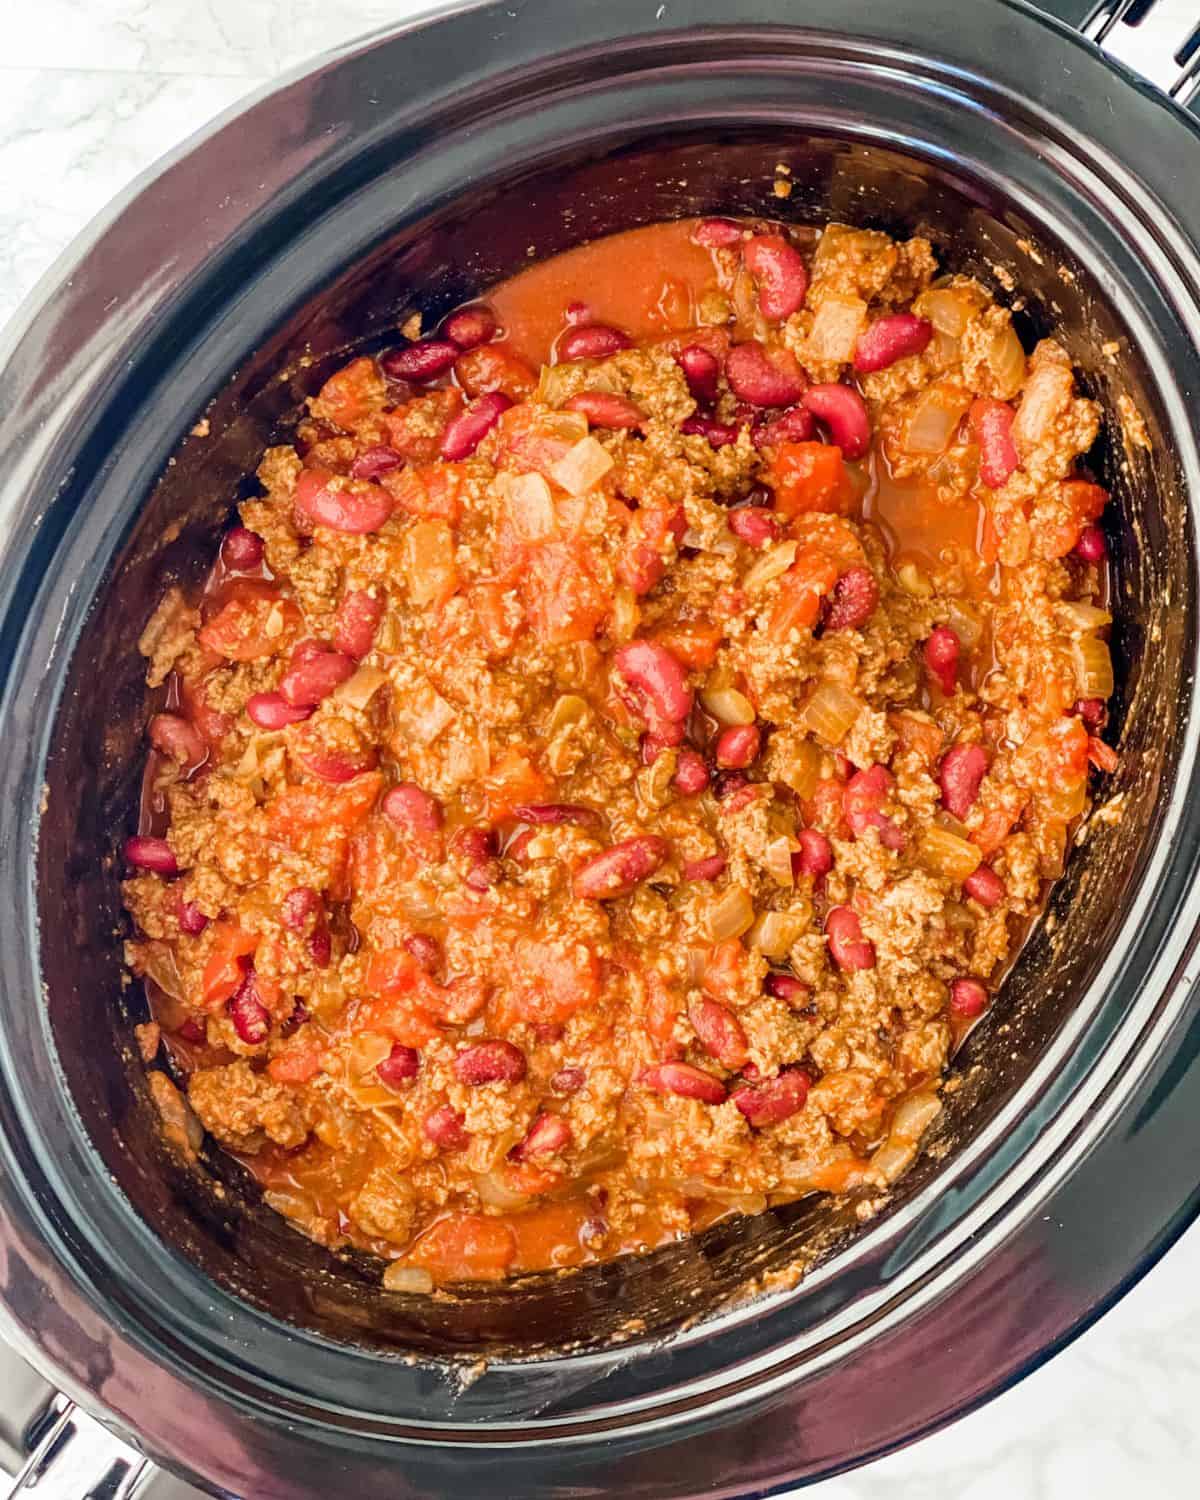 all of the ground turkey ingredients mixed int he slow cooker insert.